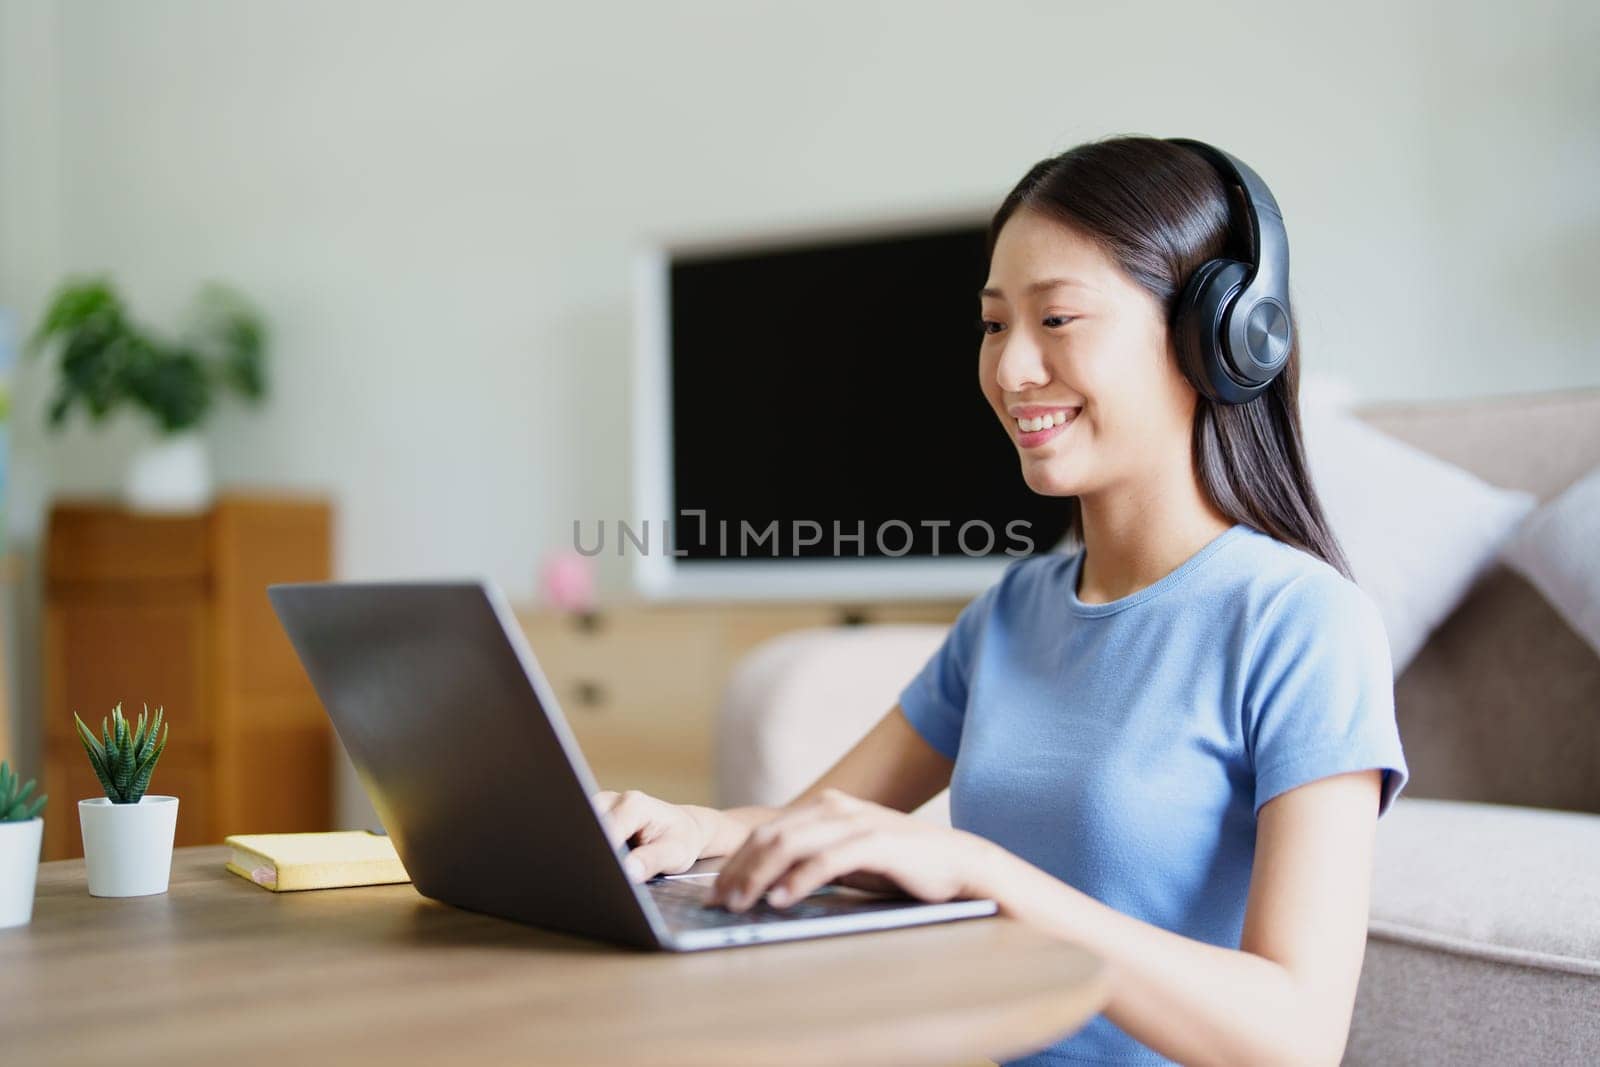 woman wearing headphones on comfortable couch listening to using computer laptop and music